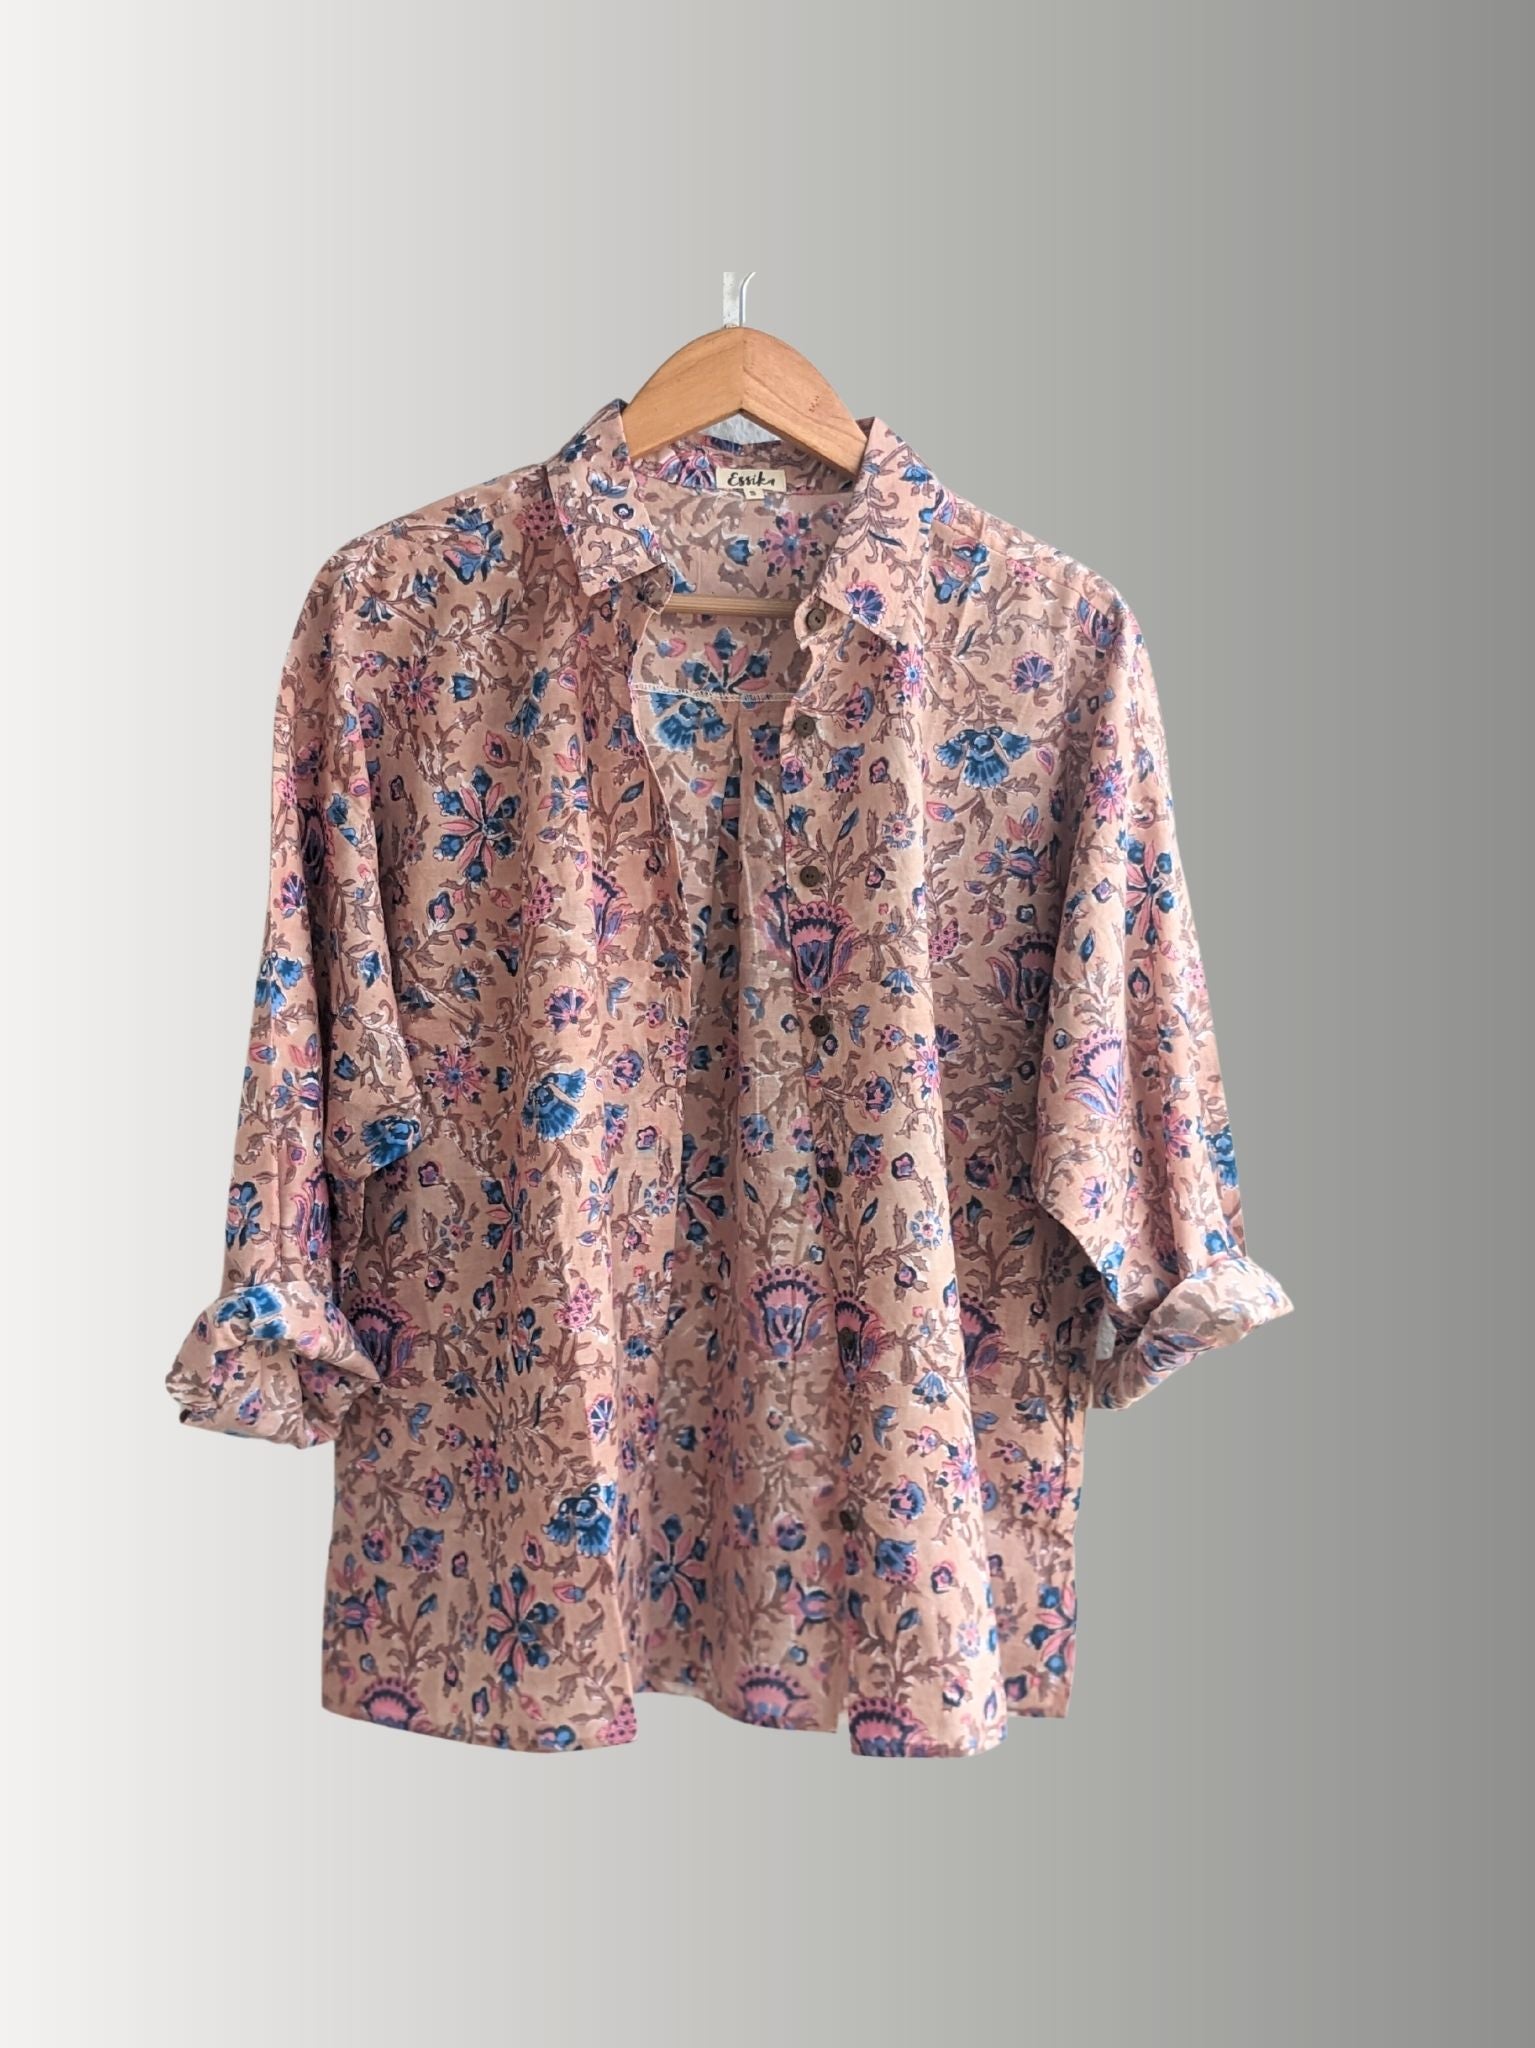 Women's Cotton full sleeves loose fitting, Casual wear shirt, Light brown with Blue and Pink  in 4 sizes (S, M, L, XL)